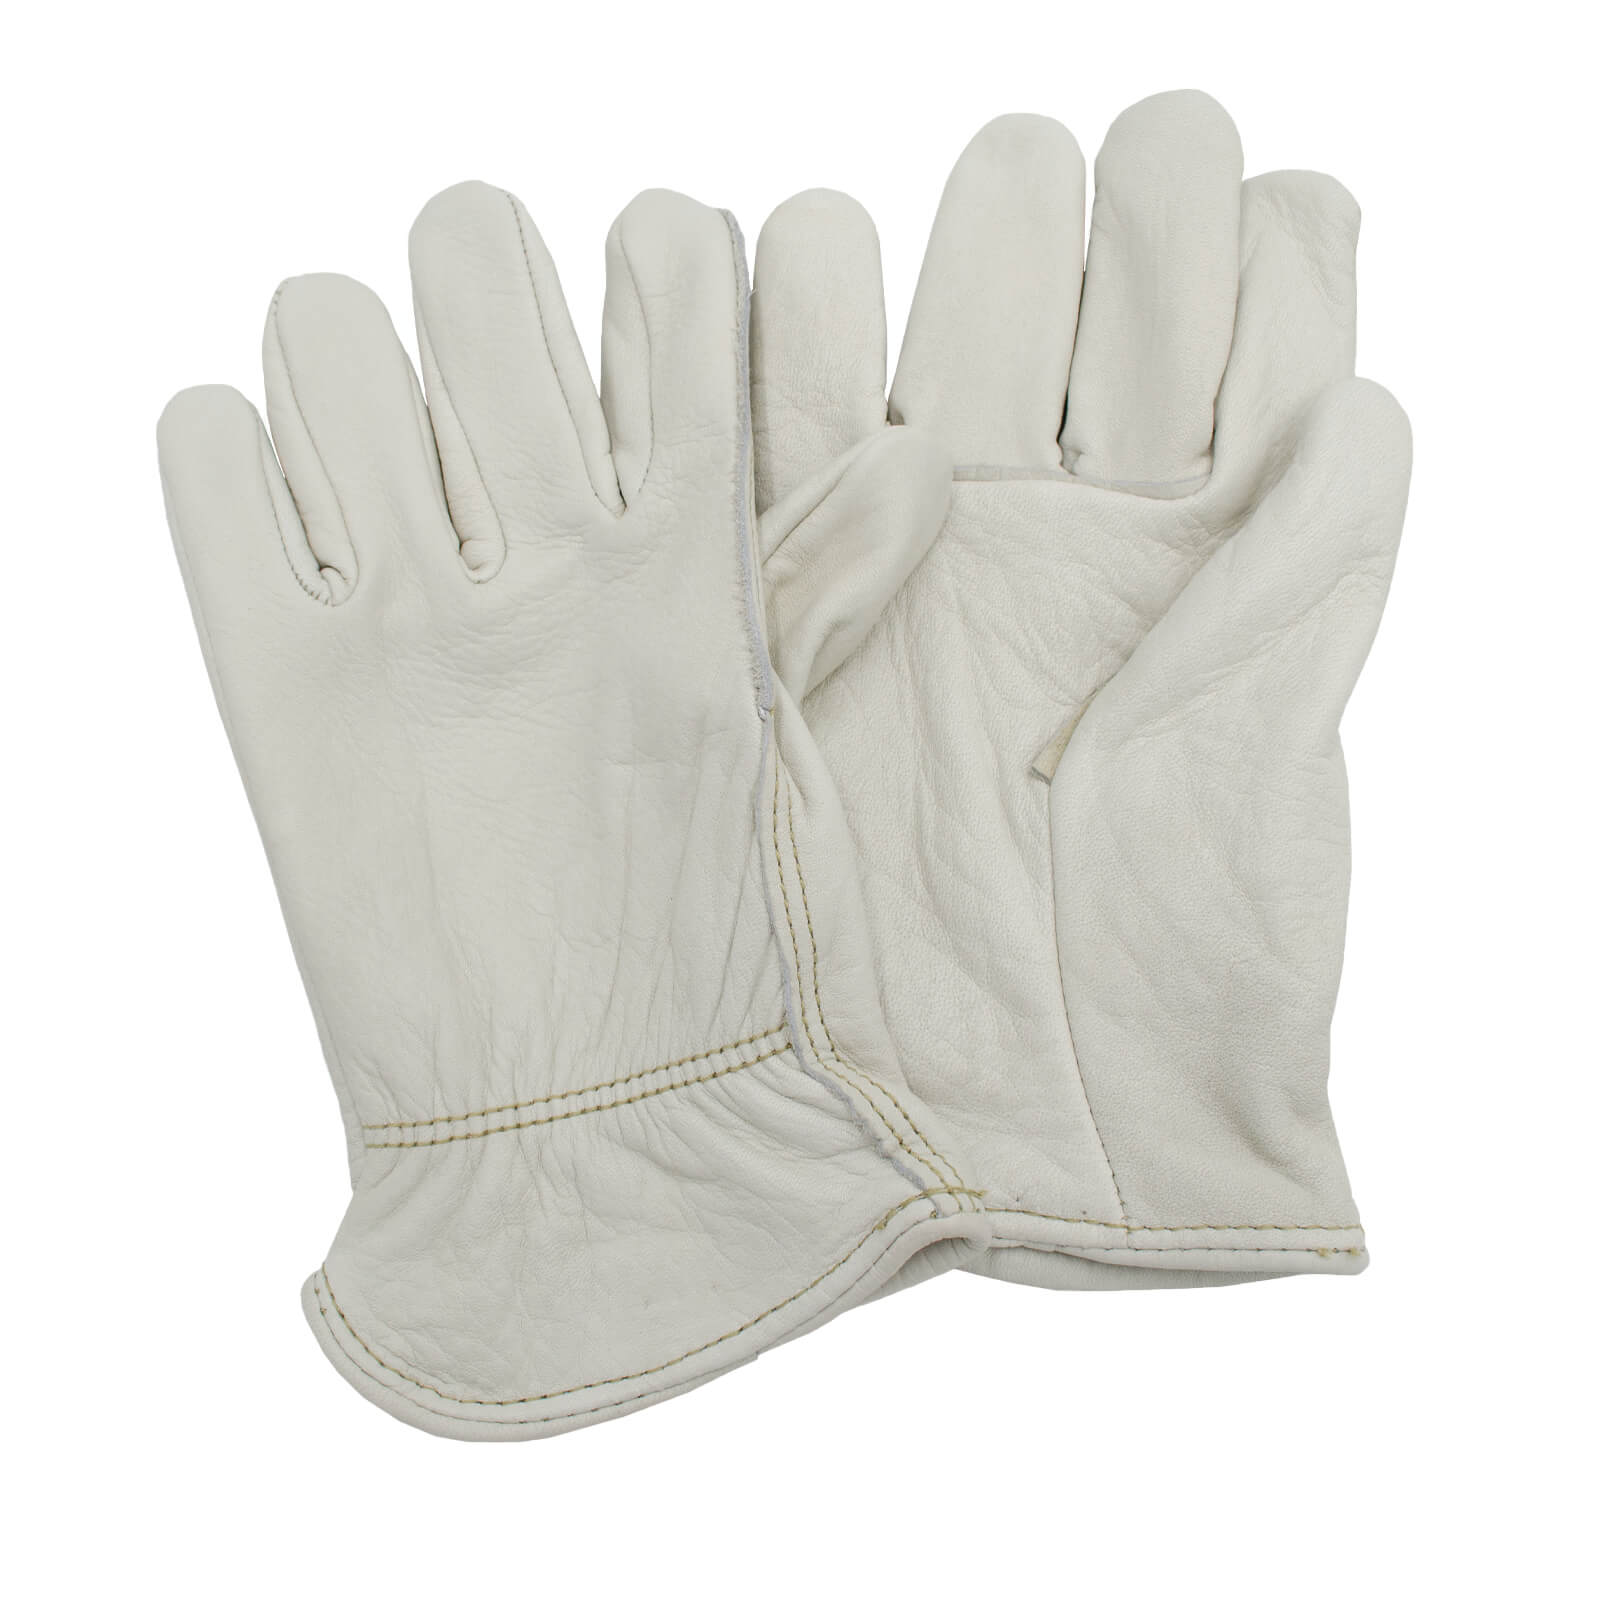 Big Mike by StoneBreaker Leather Driver Gloves - Medium